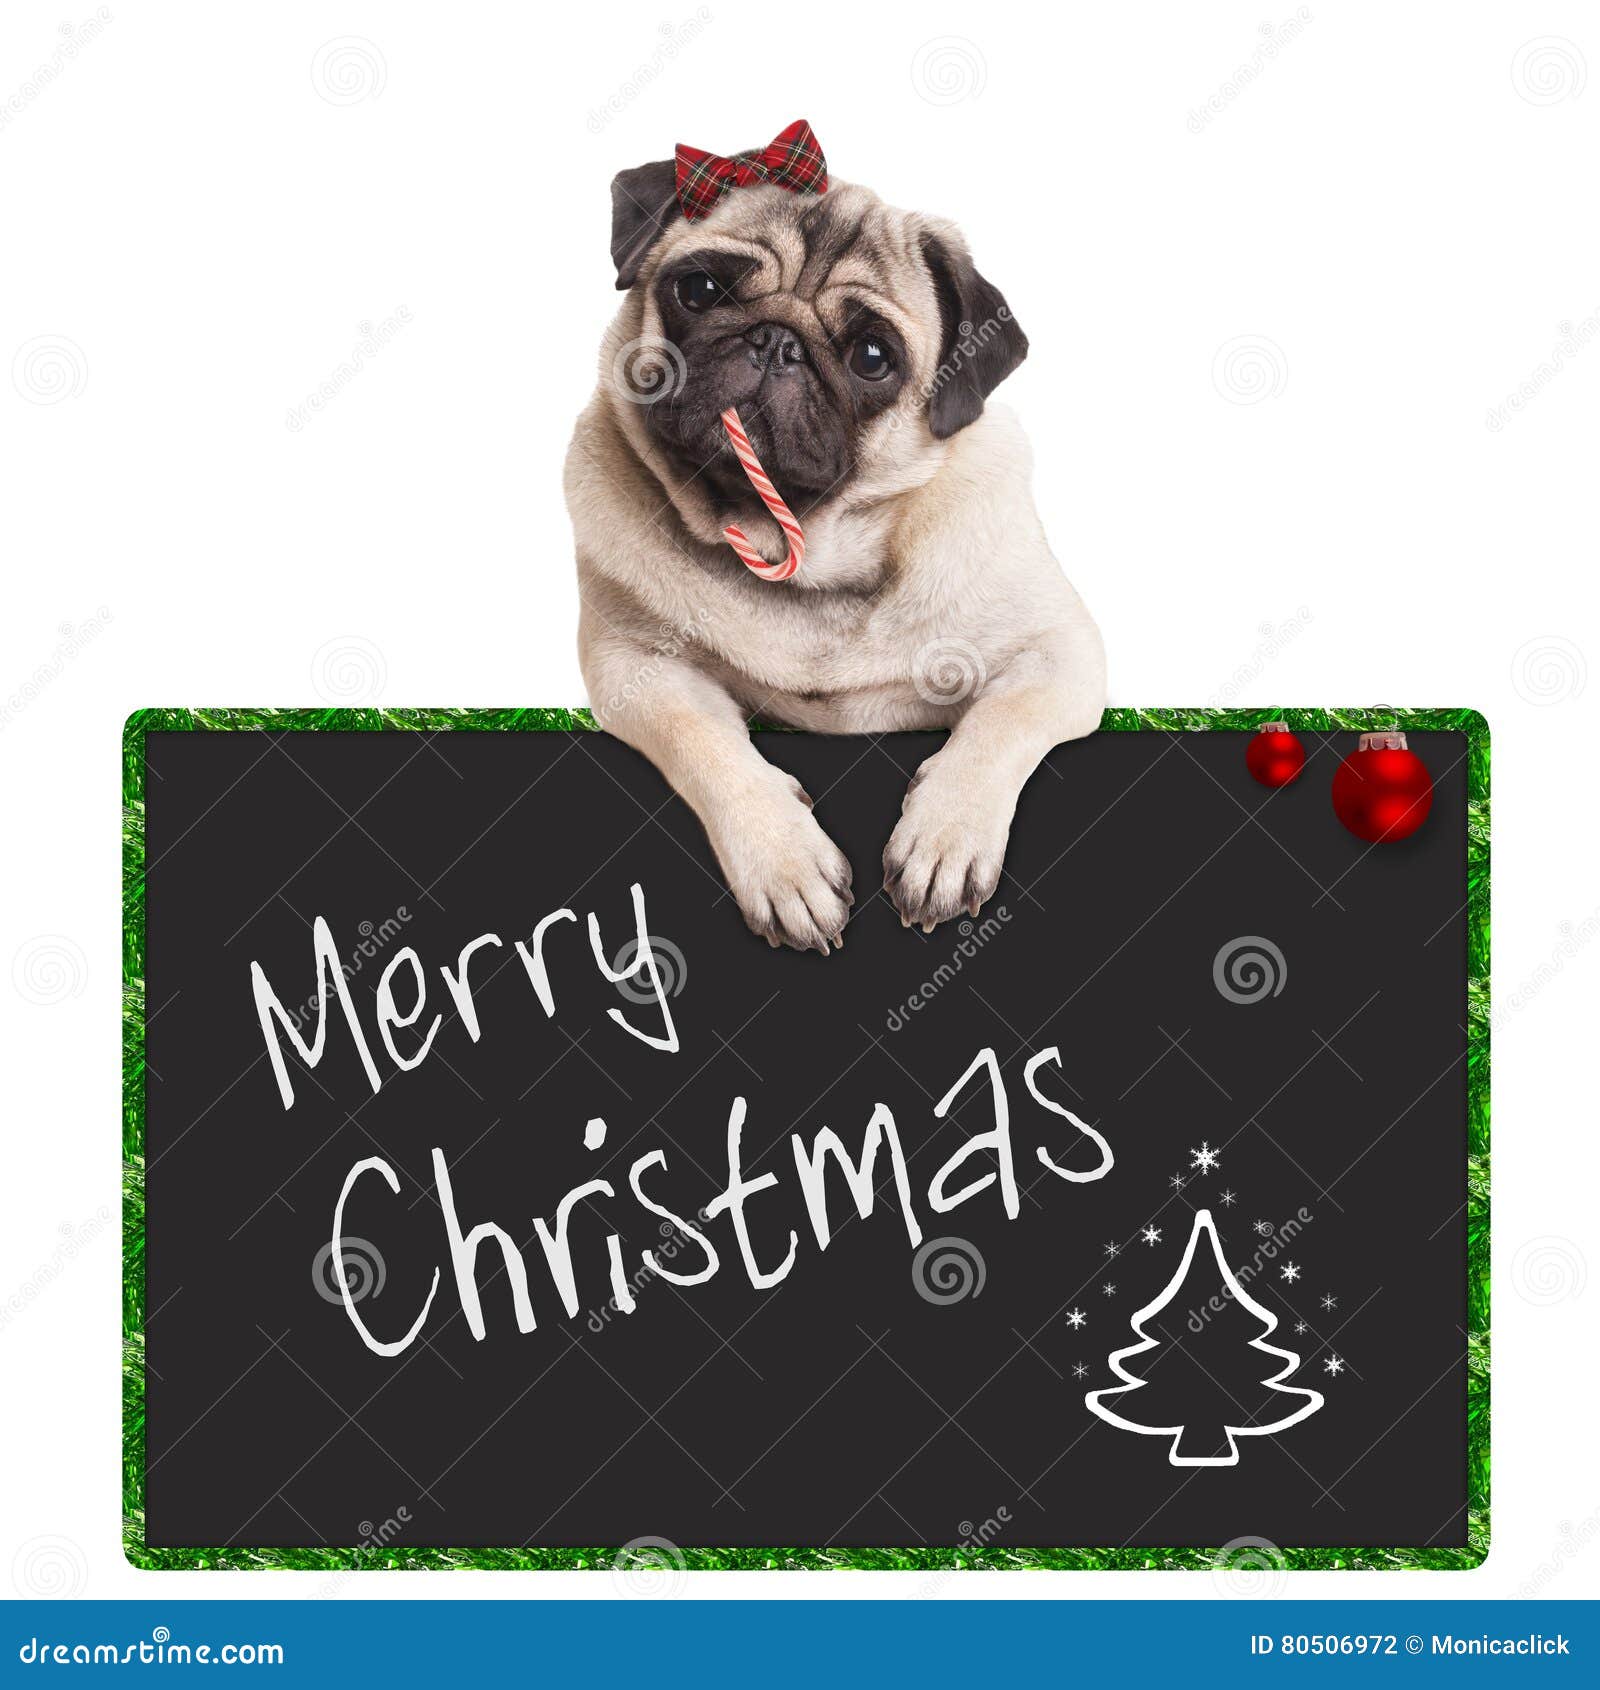 Adorable Cute Pug Puppy Dog Eating Candy Cane Leaning On Sign Saying Merry Christmas On White Background Stock Photo Image Of Merry Baubles 80506972